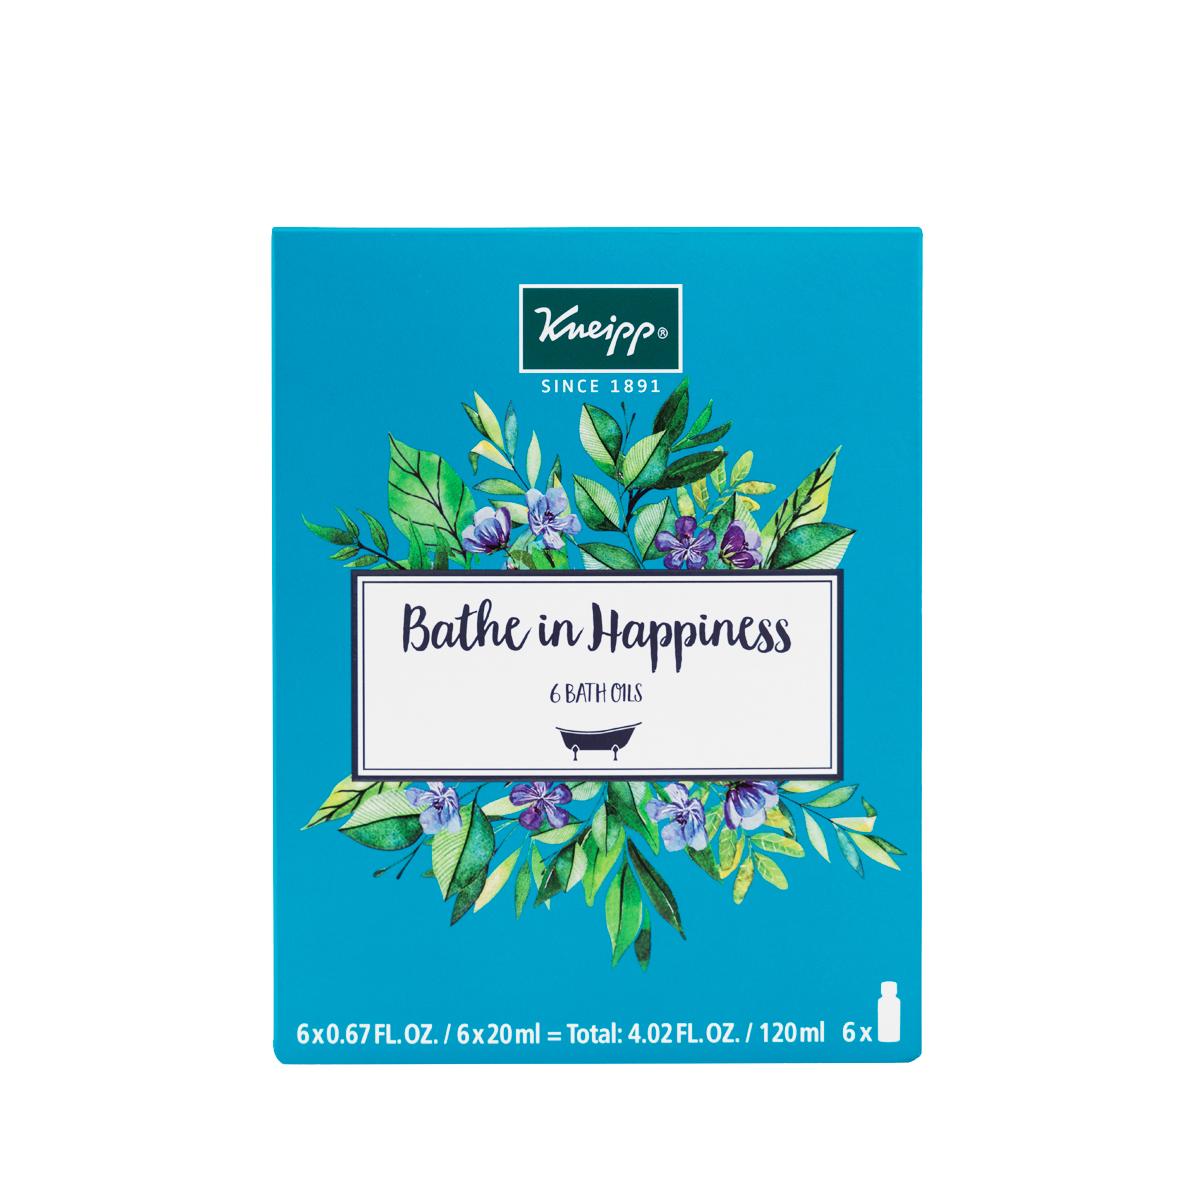 Primary image of Happiness Bath Oil Set